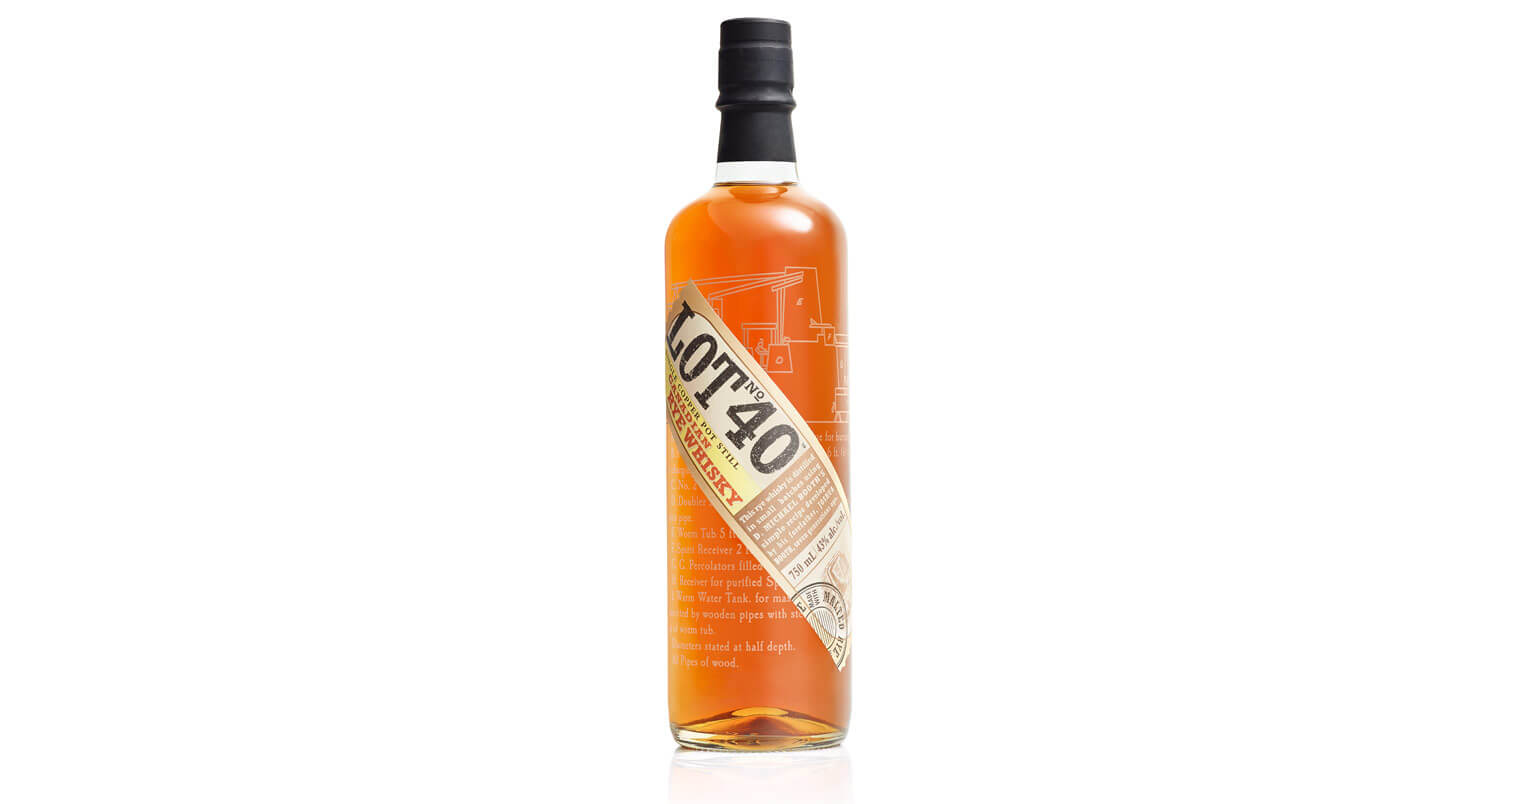 Lot No. 40 - Canadian Whisky of the Year, featured brands, featured image